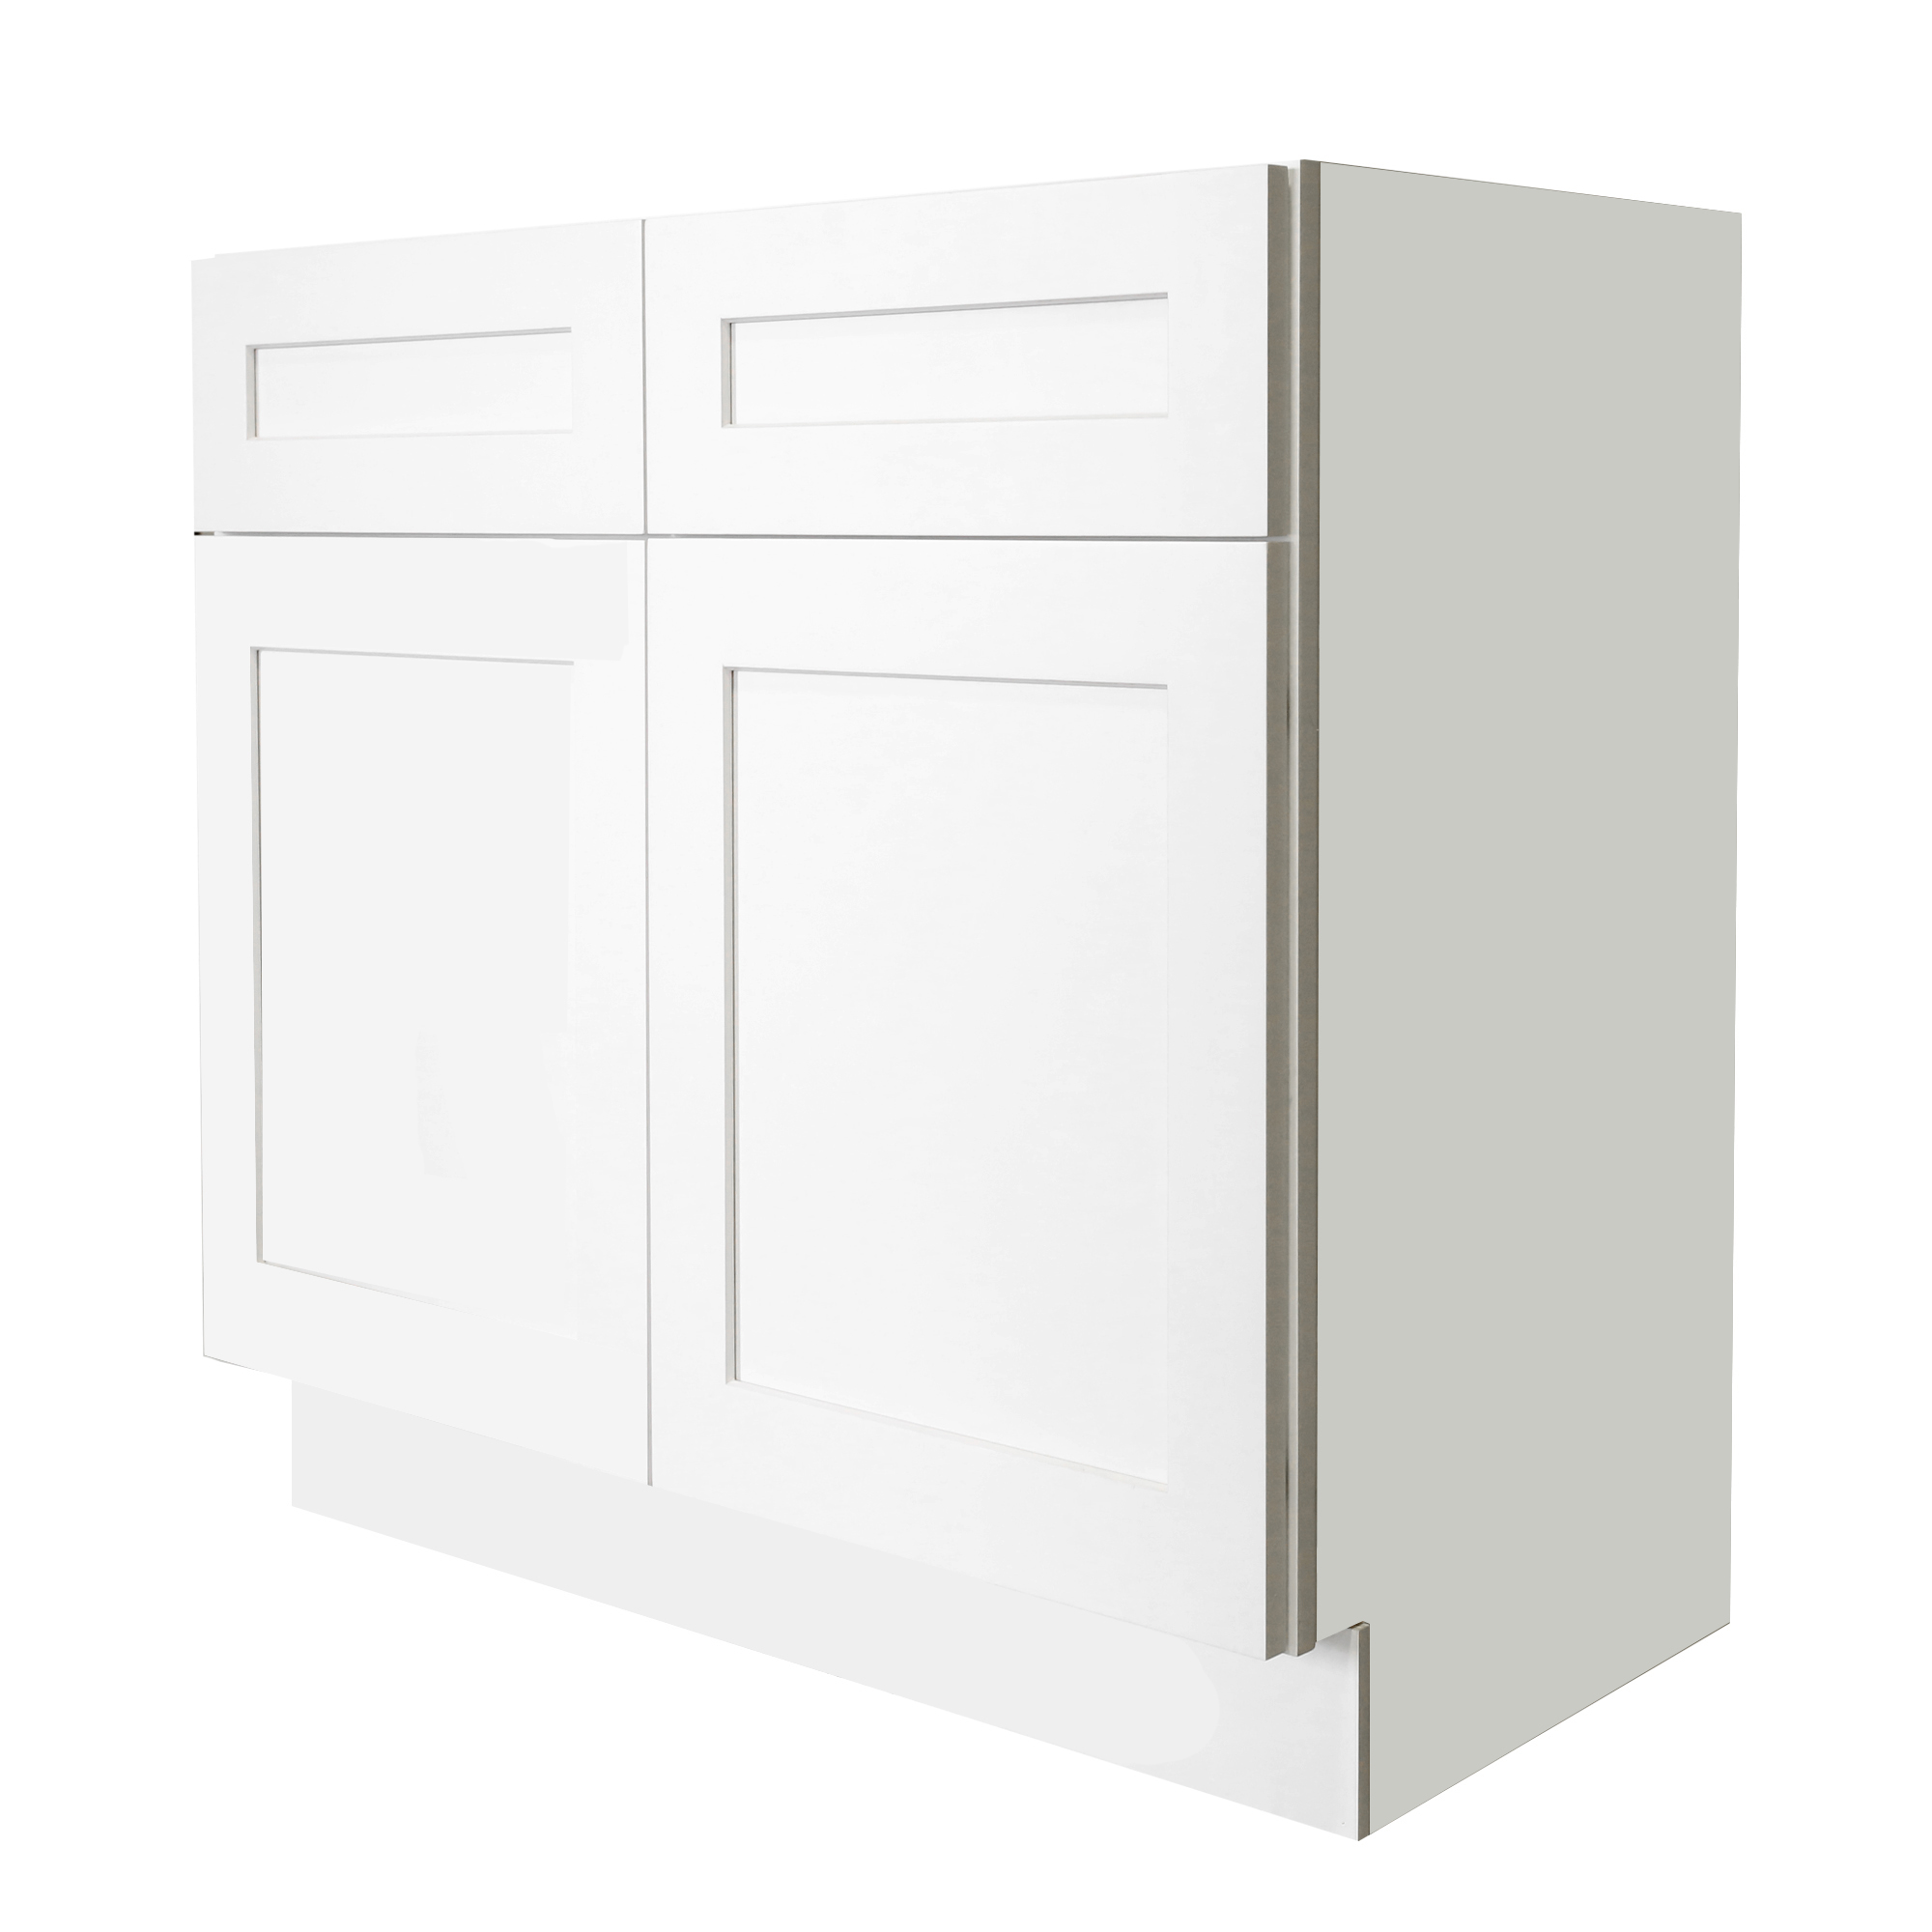 Ready to Assemble 33x34.5x24 in. Shaker Sink Base Cabinet with 2 Doors in White